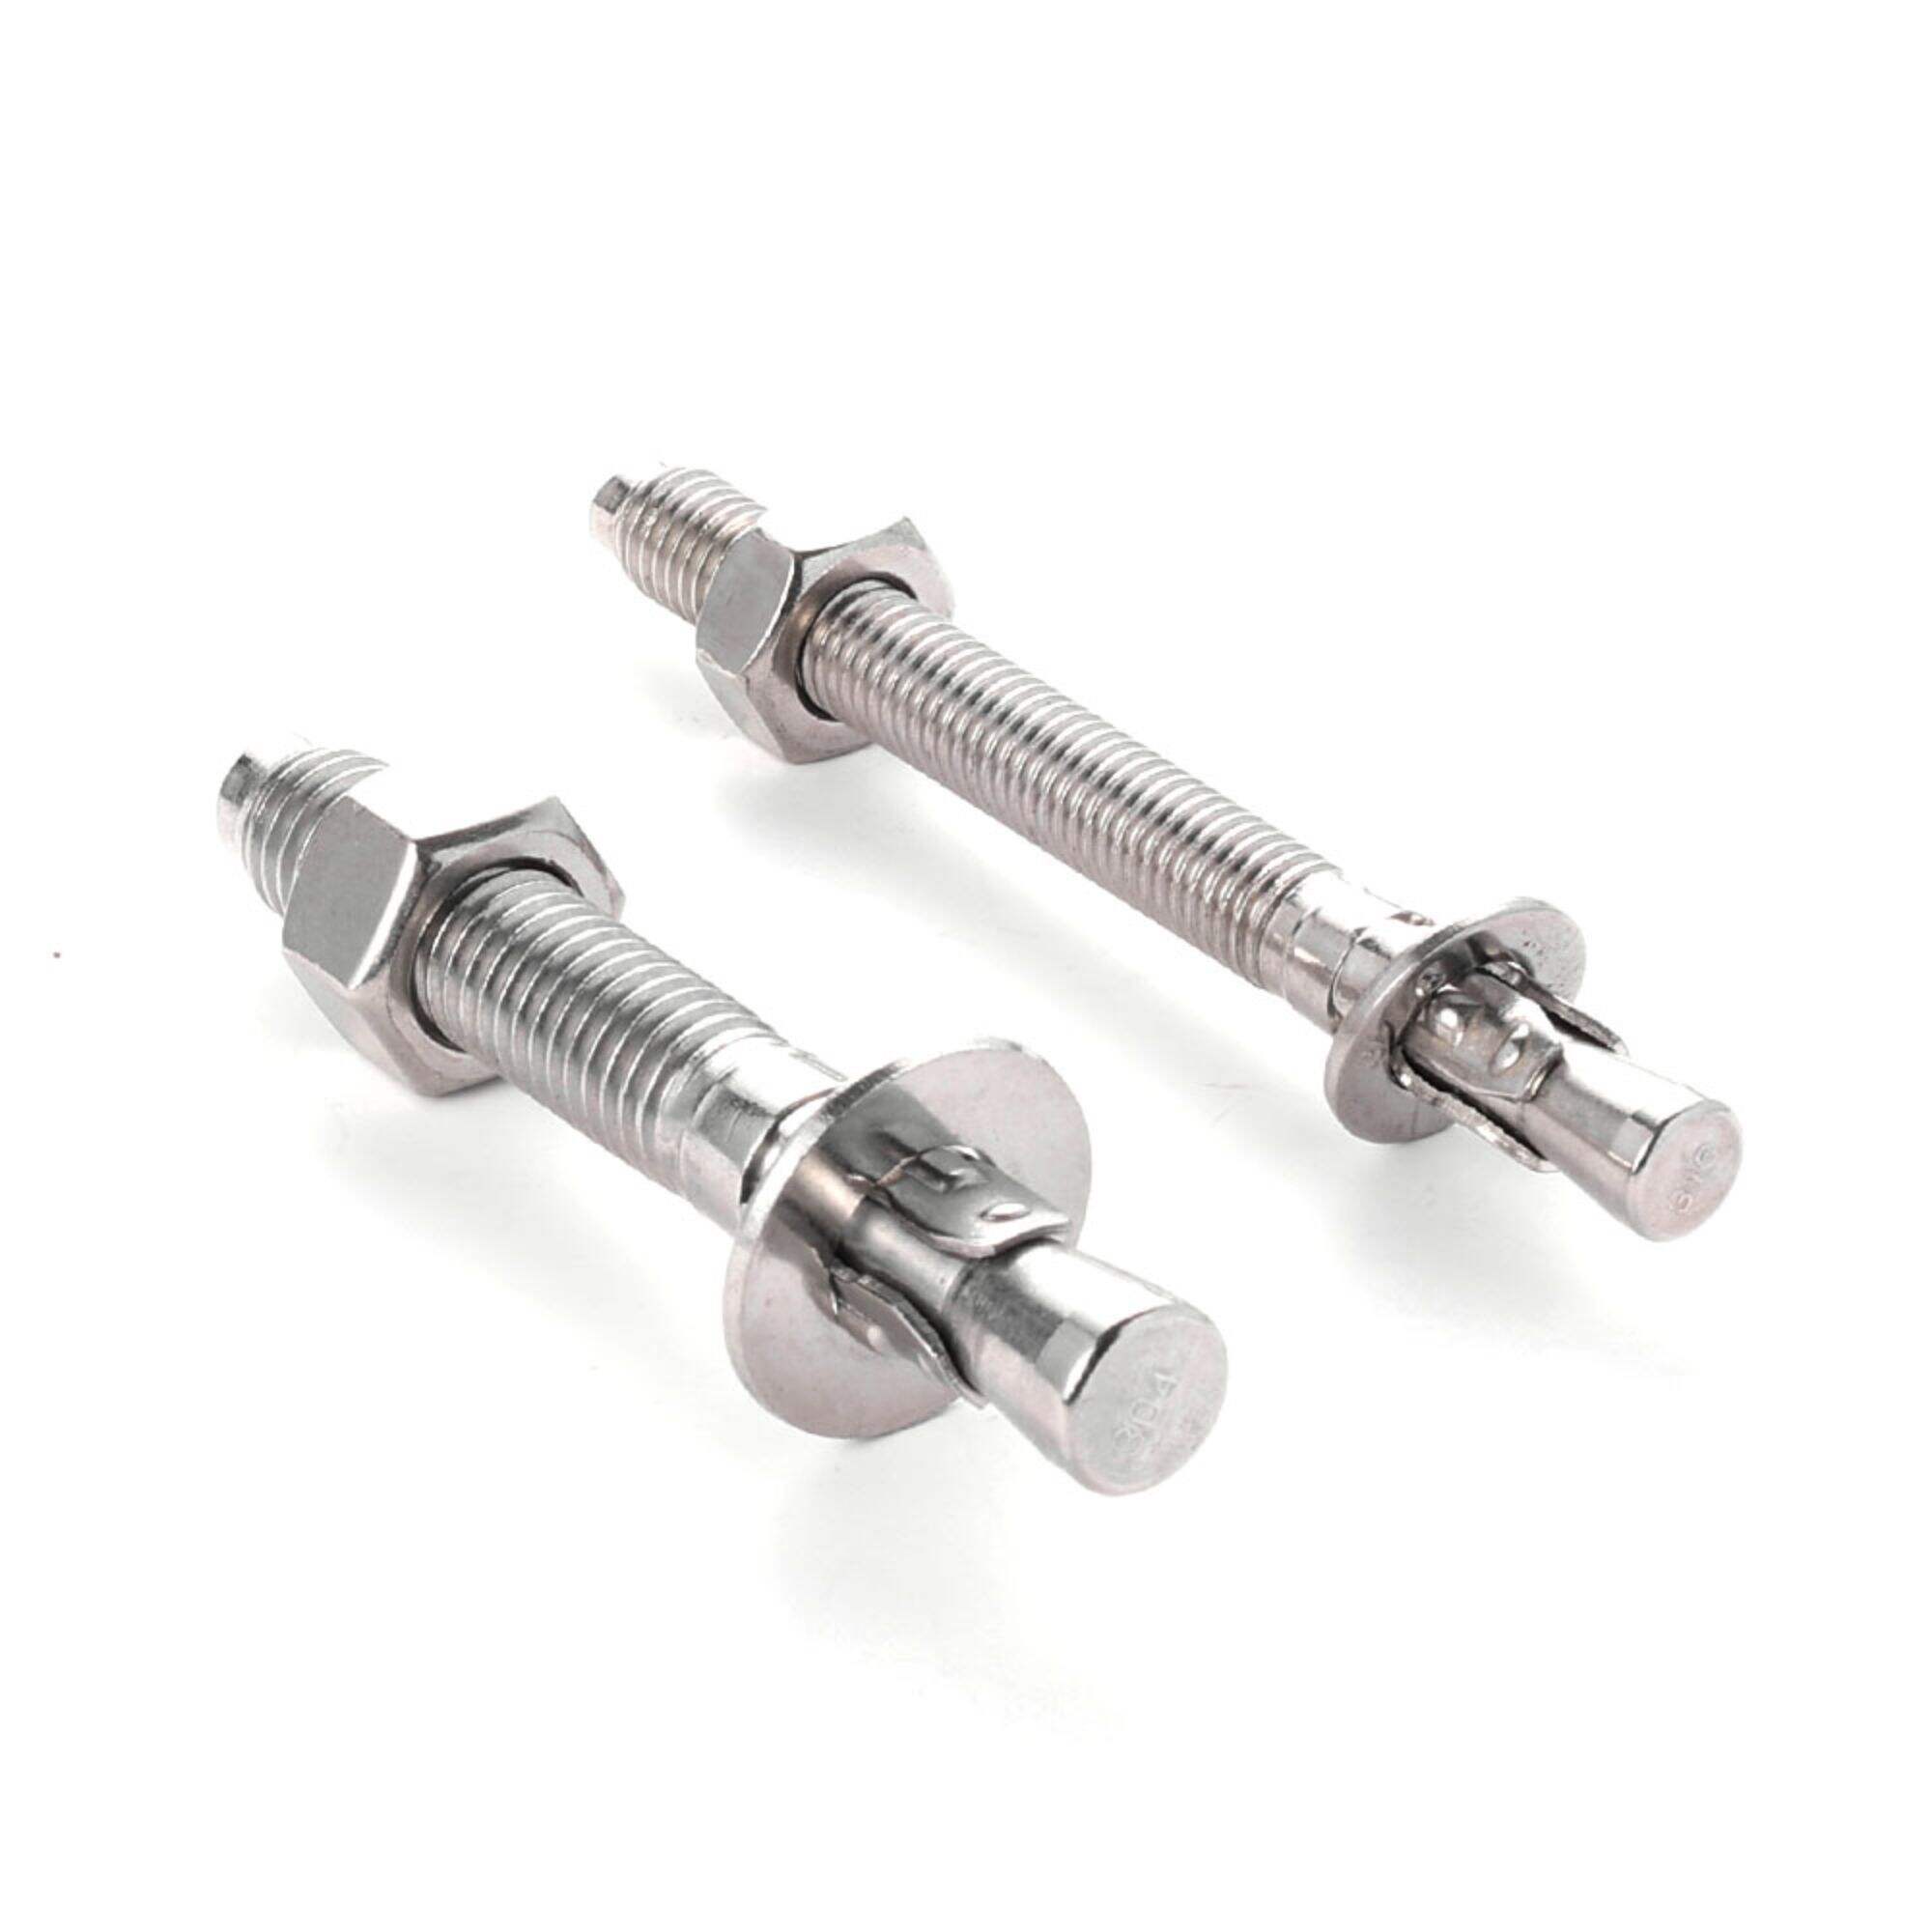 18-8 Stainless Steel Expansion Wedge Anchor Bolt for Concrete